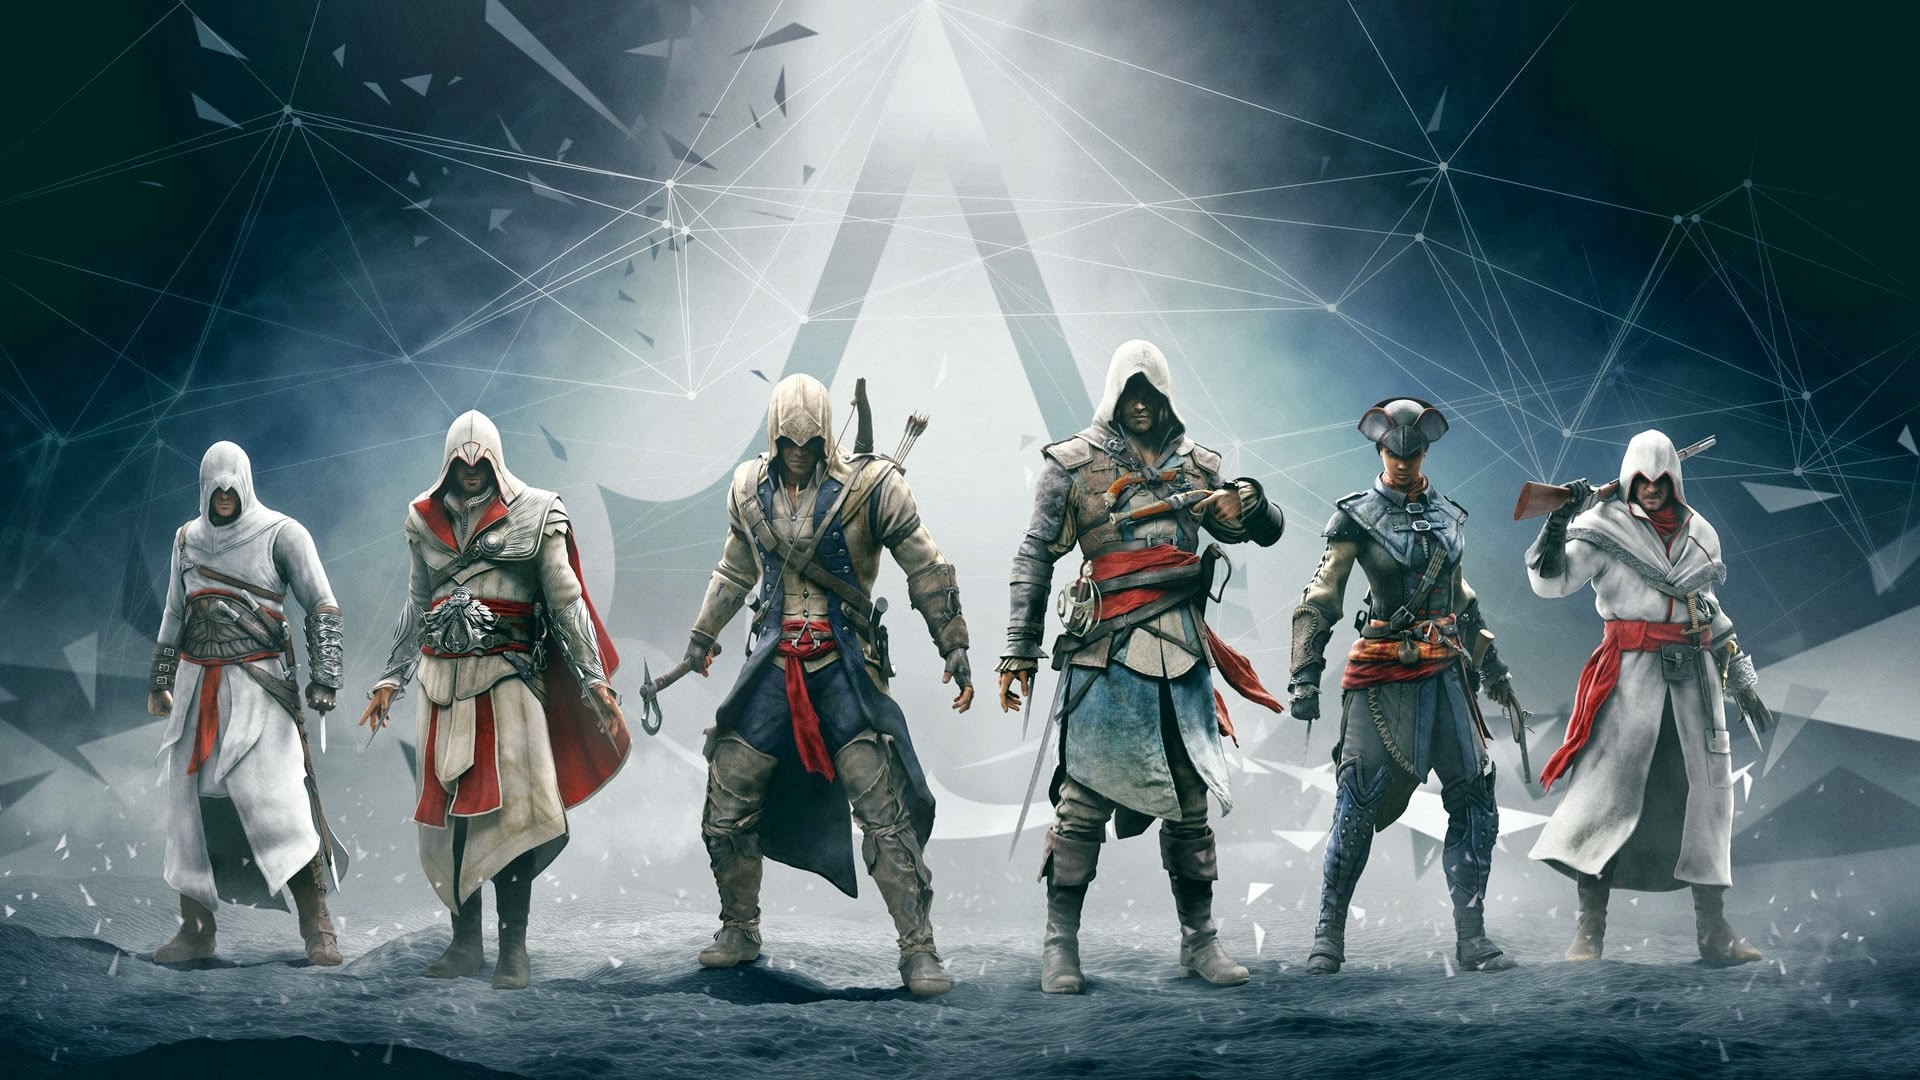 1920x1080 New Assassin's Creed Costumes Added!